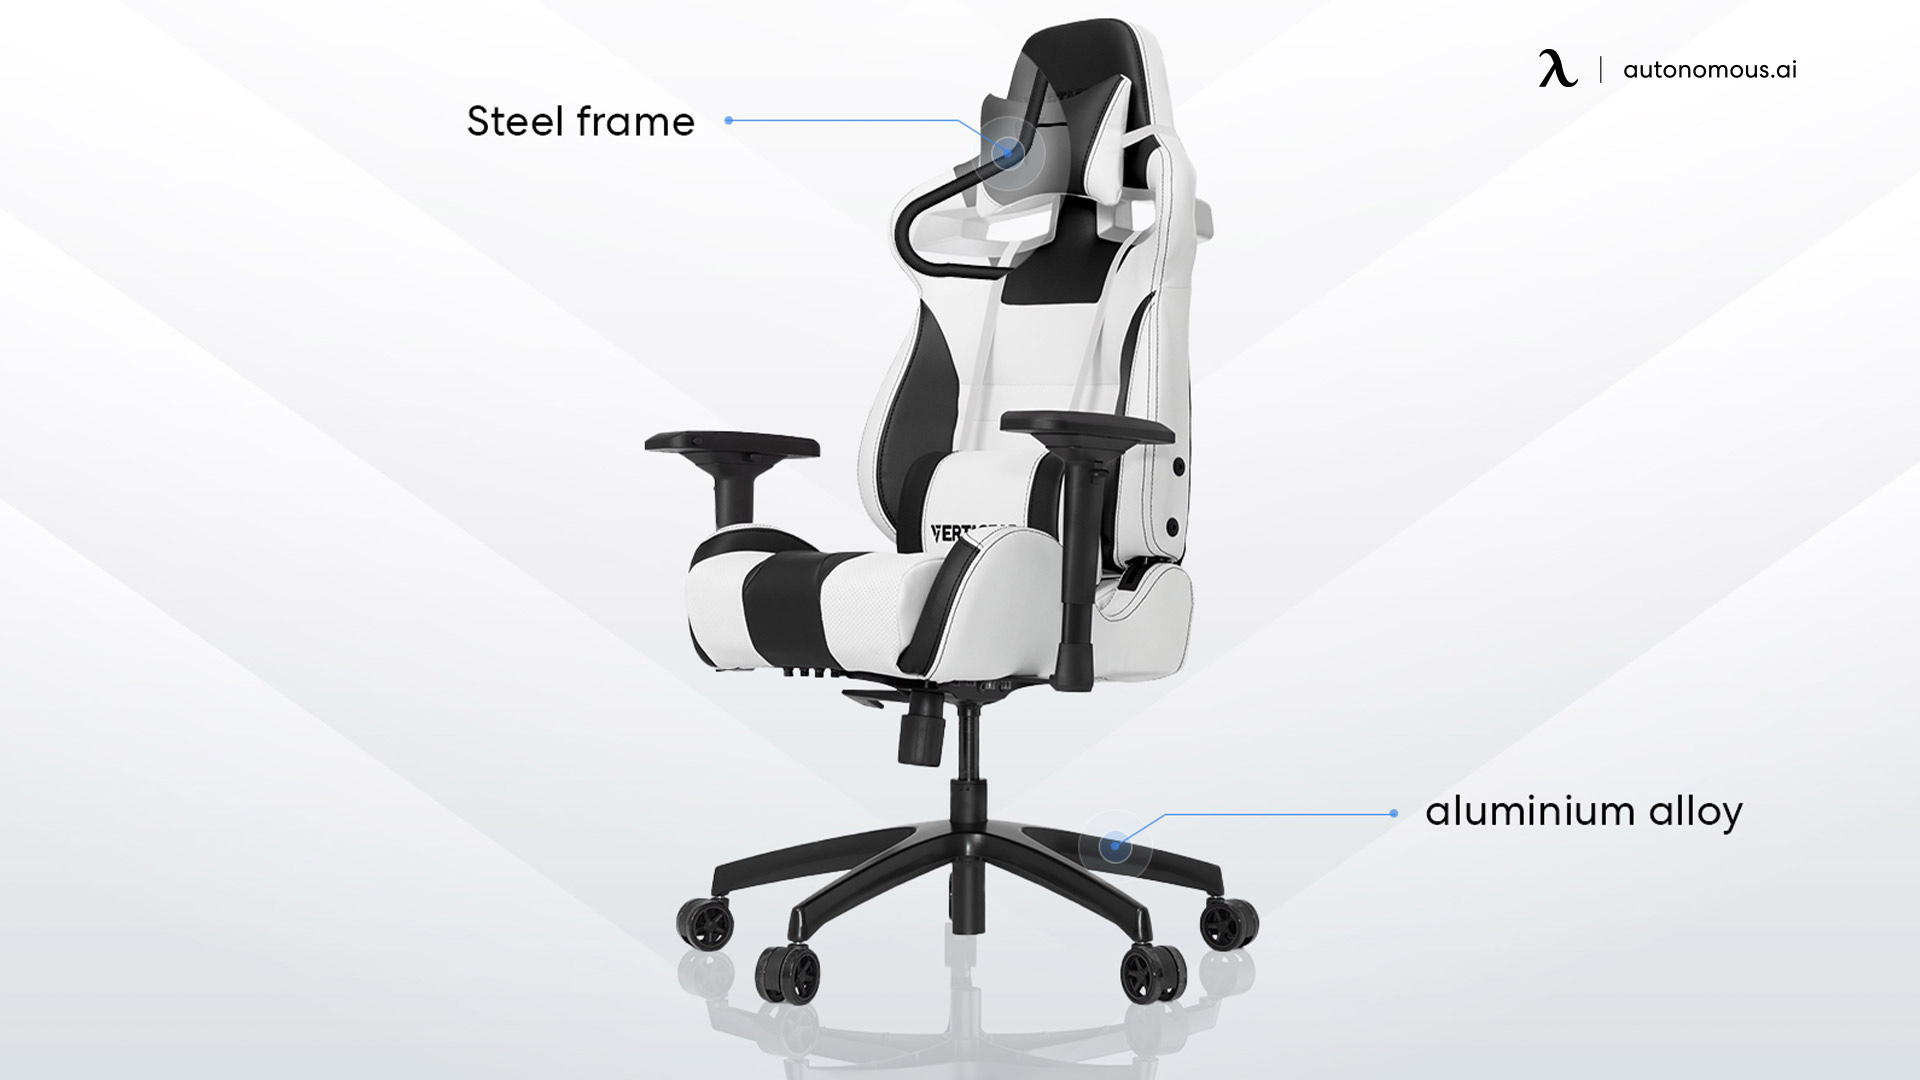 Quality of Vertagear gaming chair